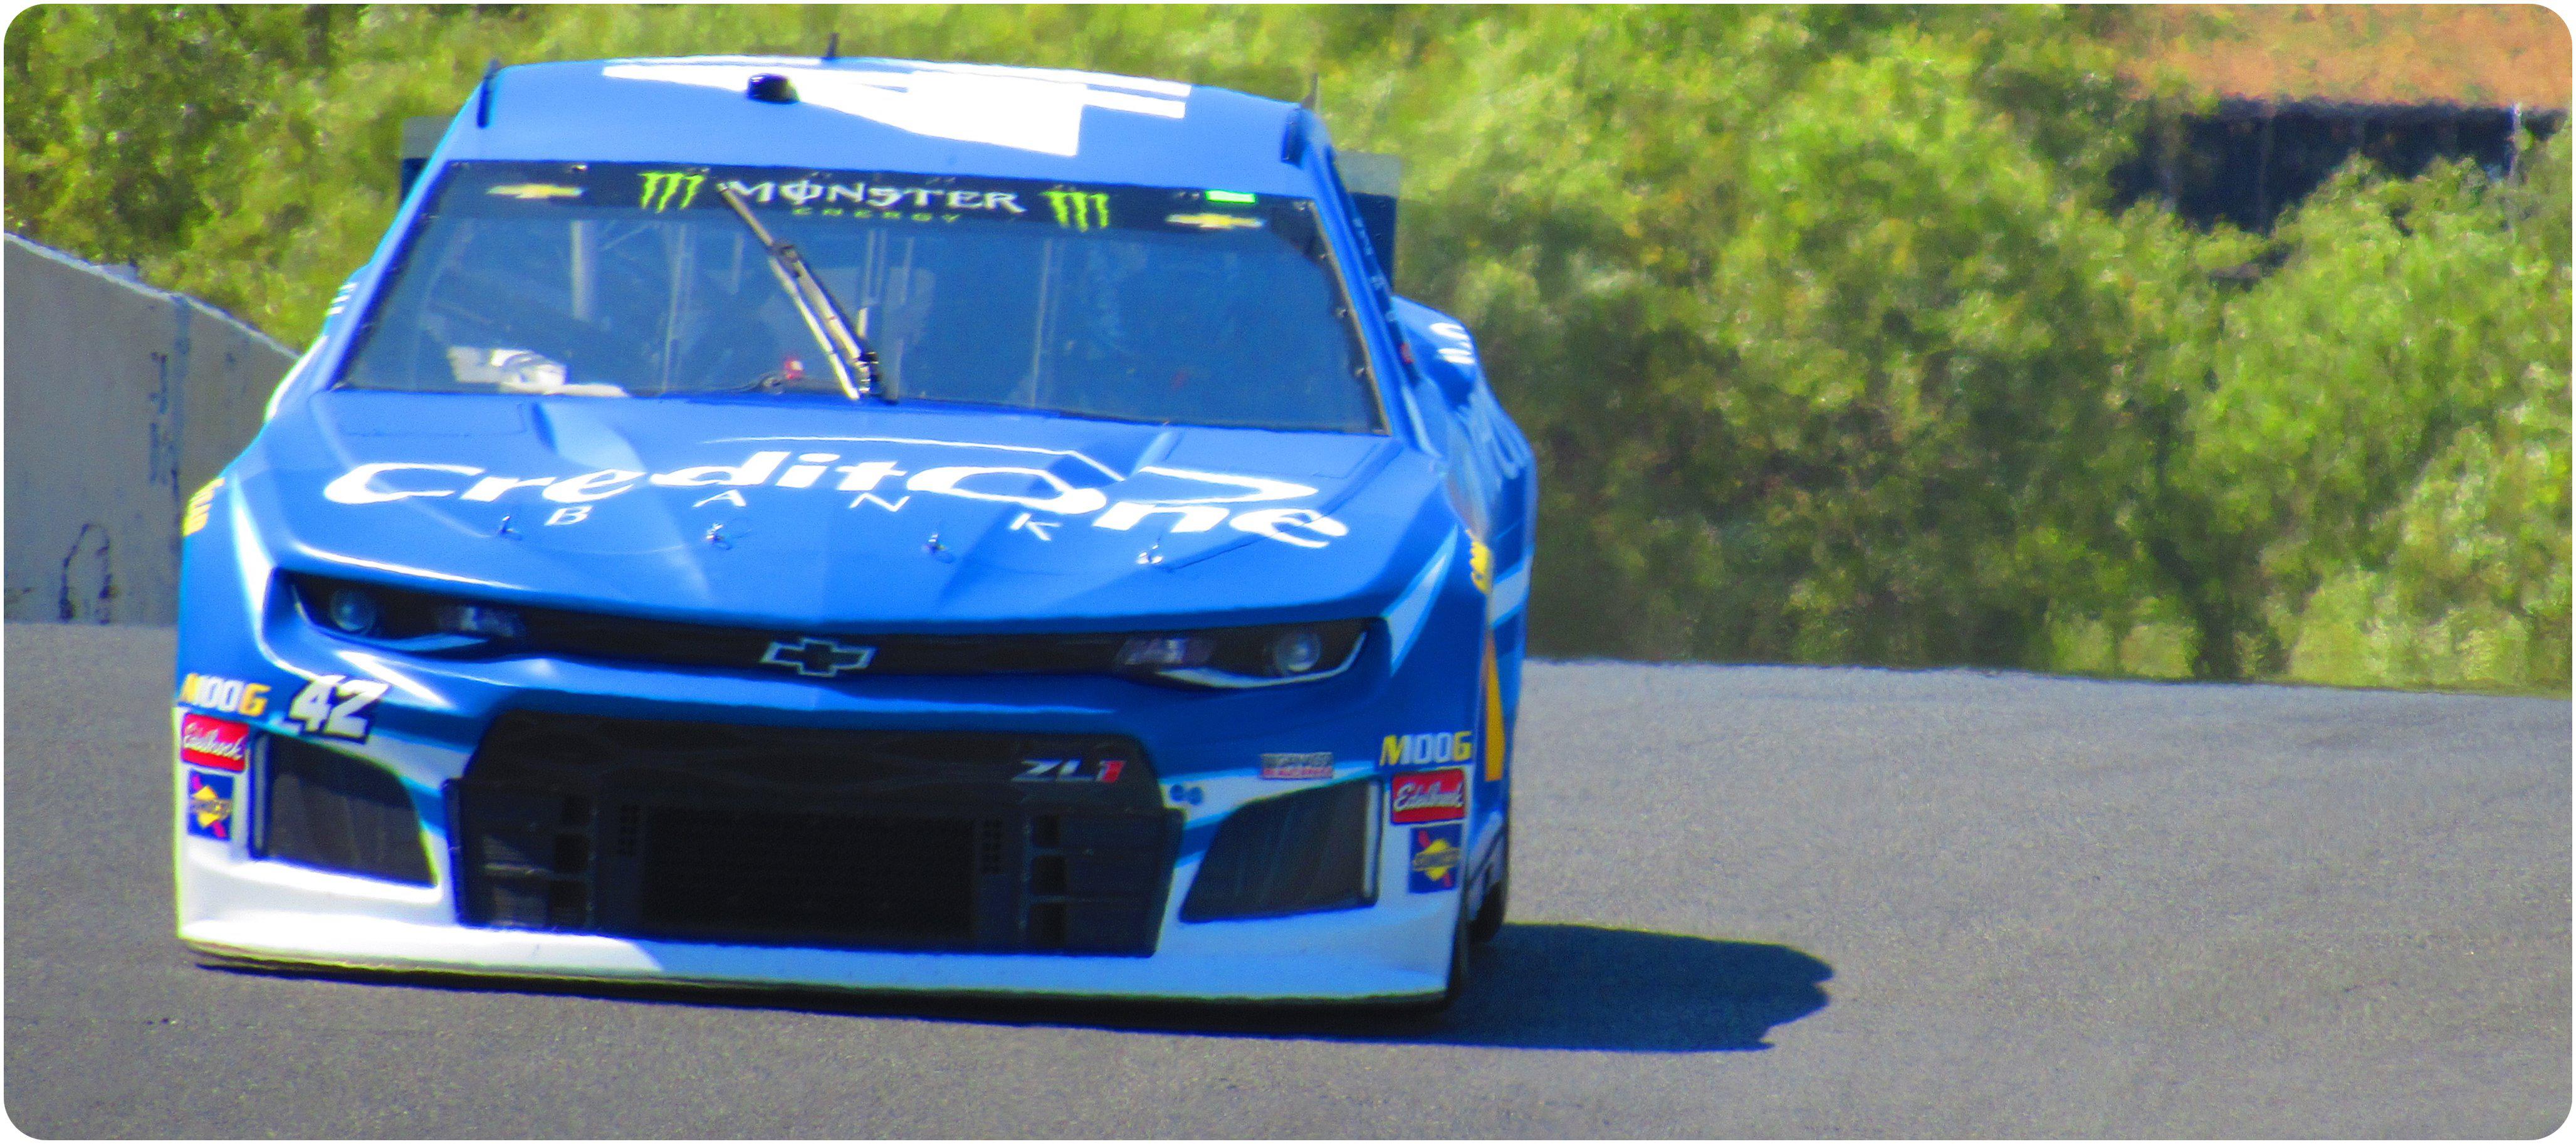 Pole sitter Kyle Larson wants a win in today's Toyota/Save Mart 350 at Sonoma! (Photo Credit: Boer83)